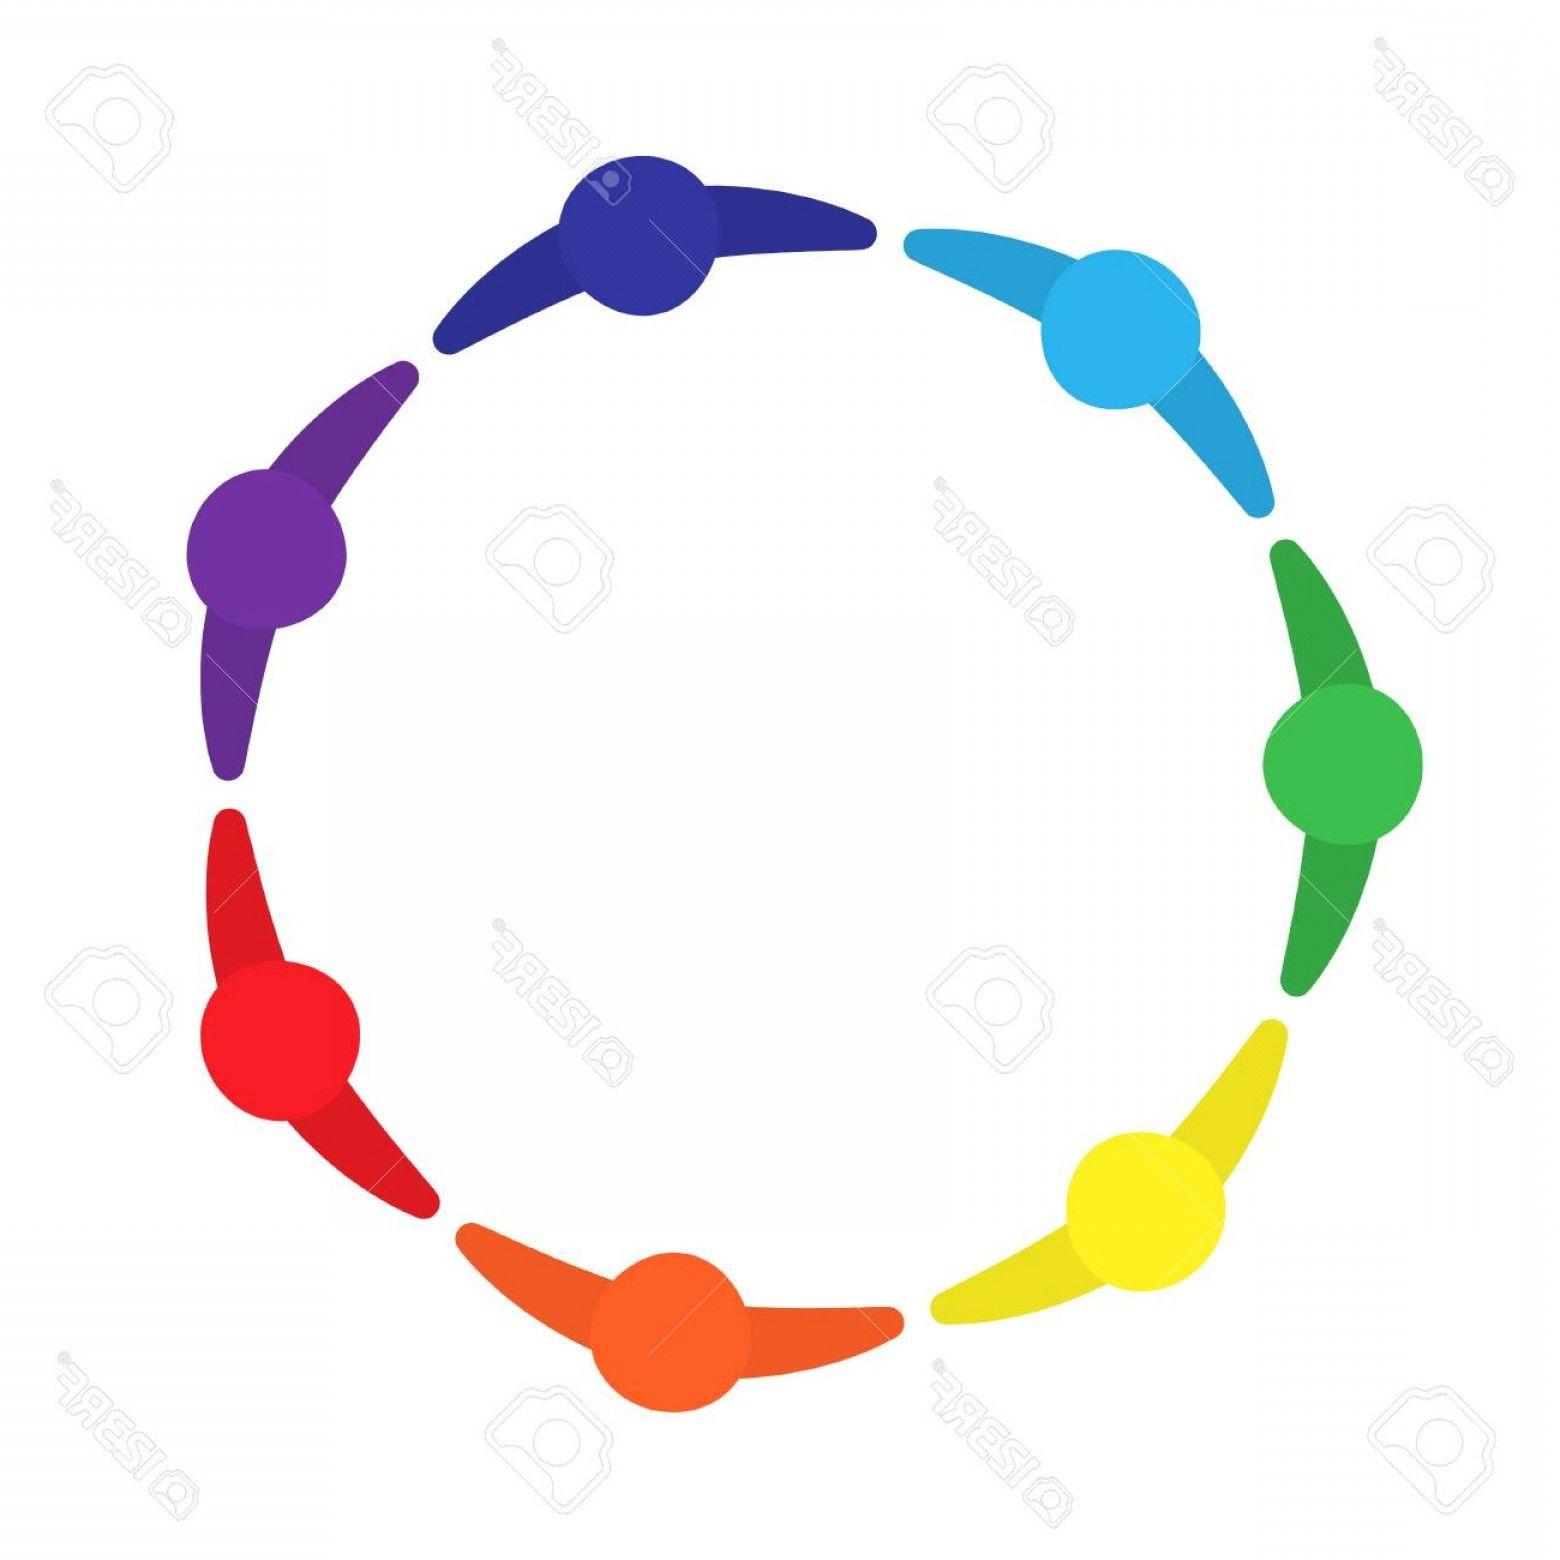 Circle Person Logo - Photostock Vector Motivated Group Of People Logo Circle Of A Person